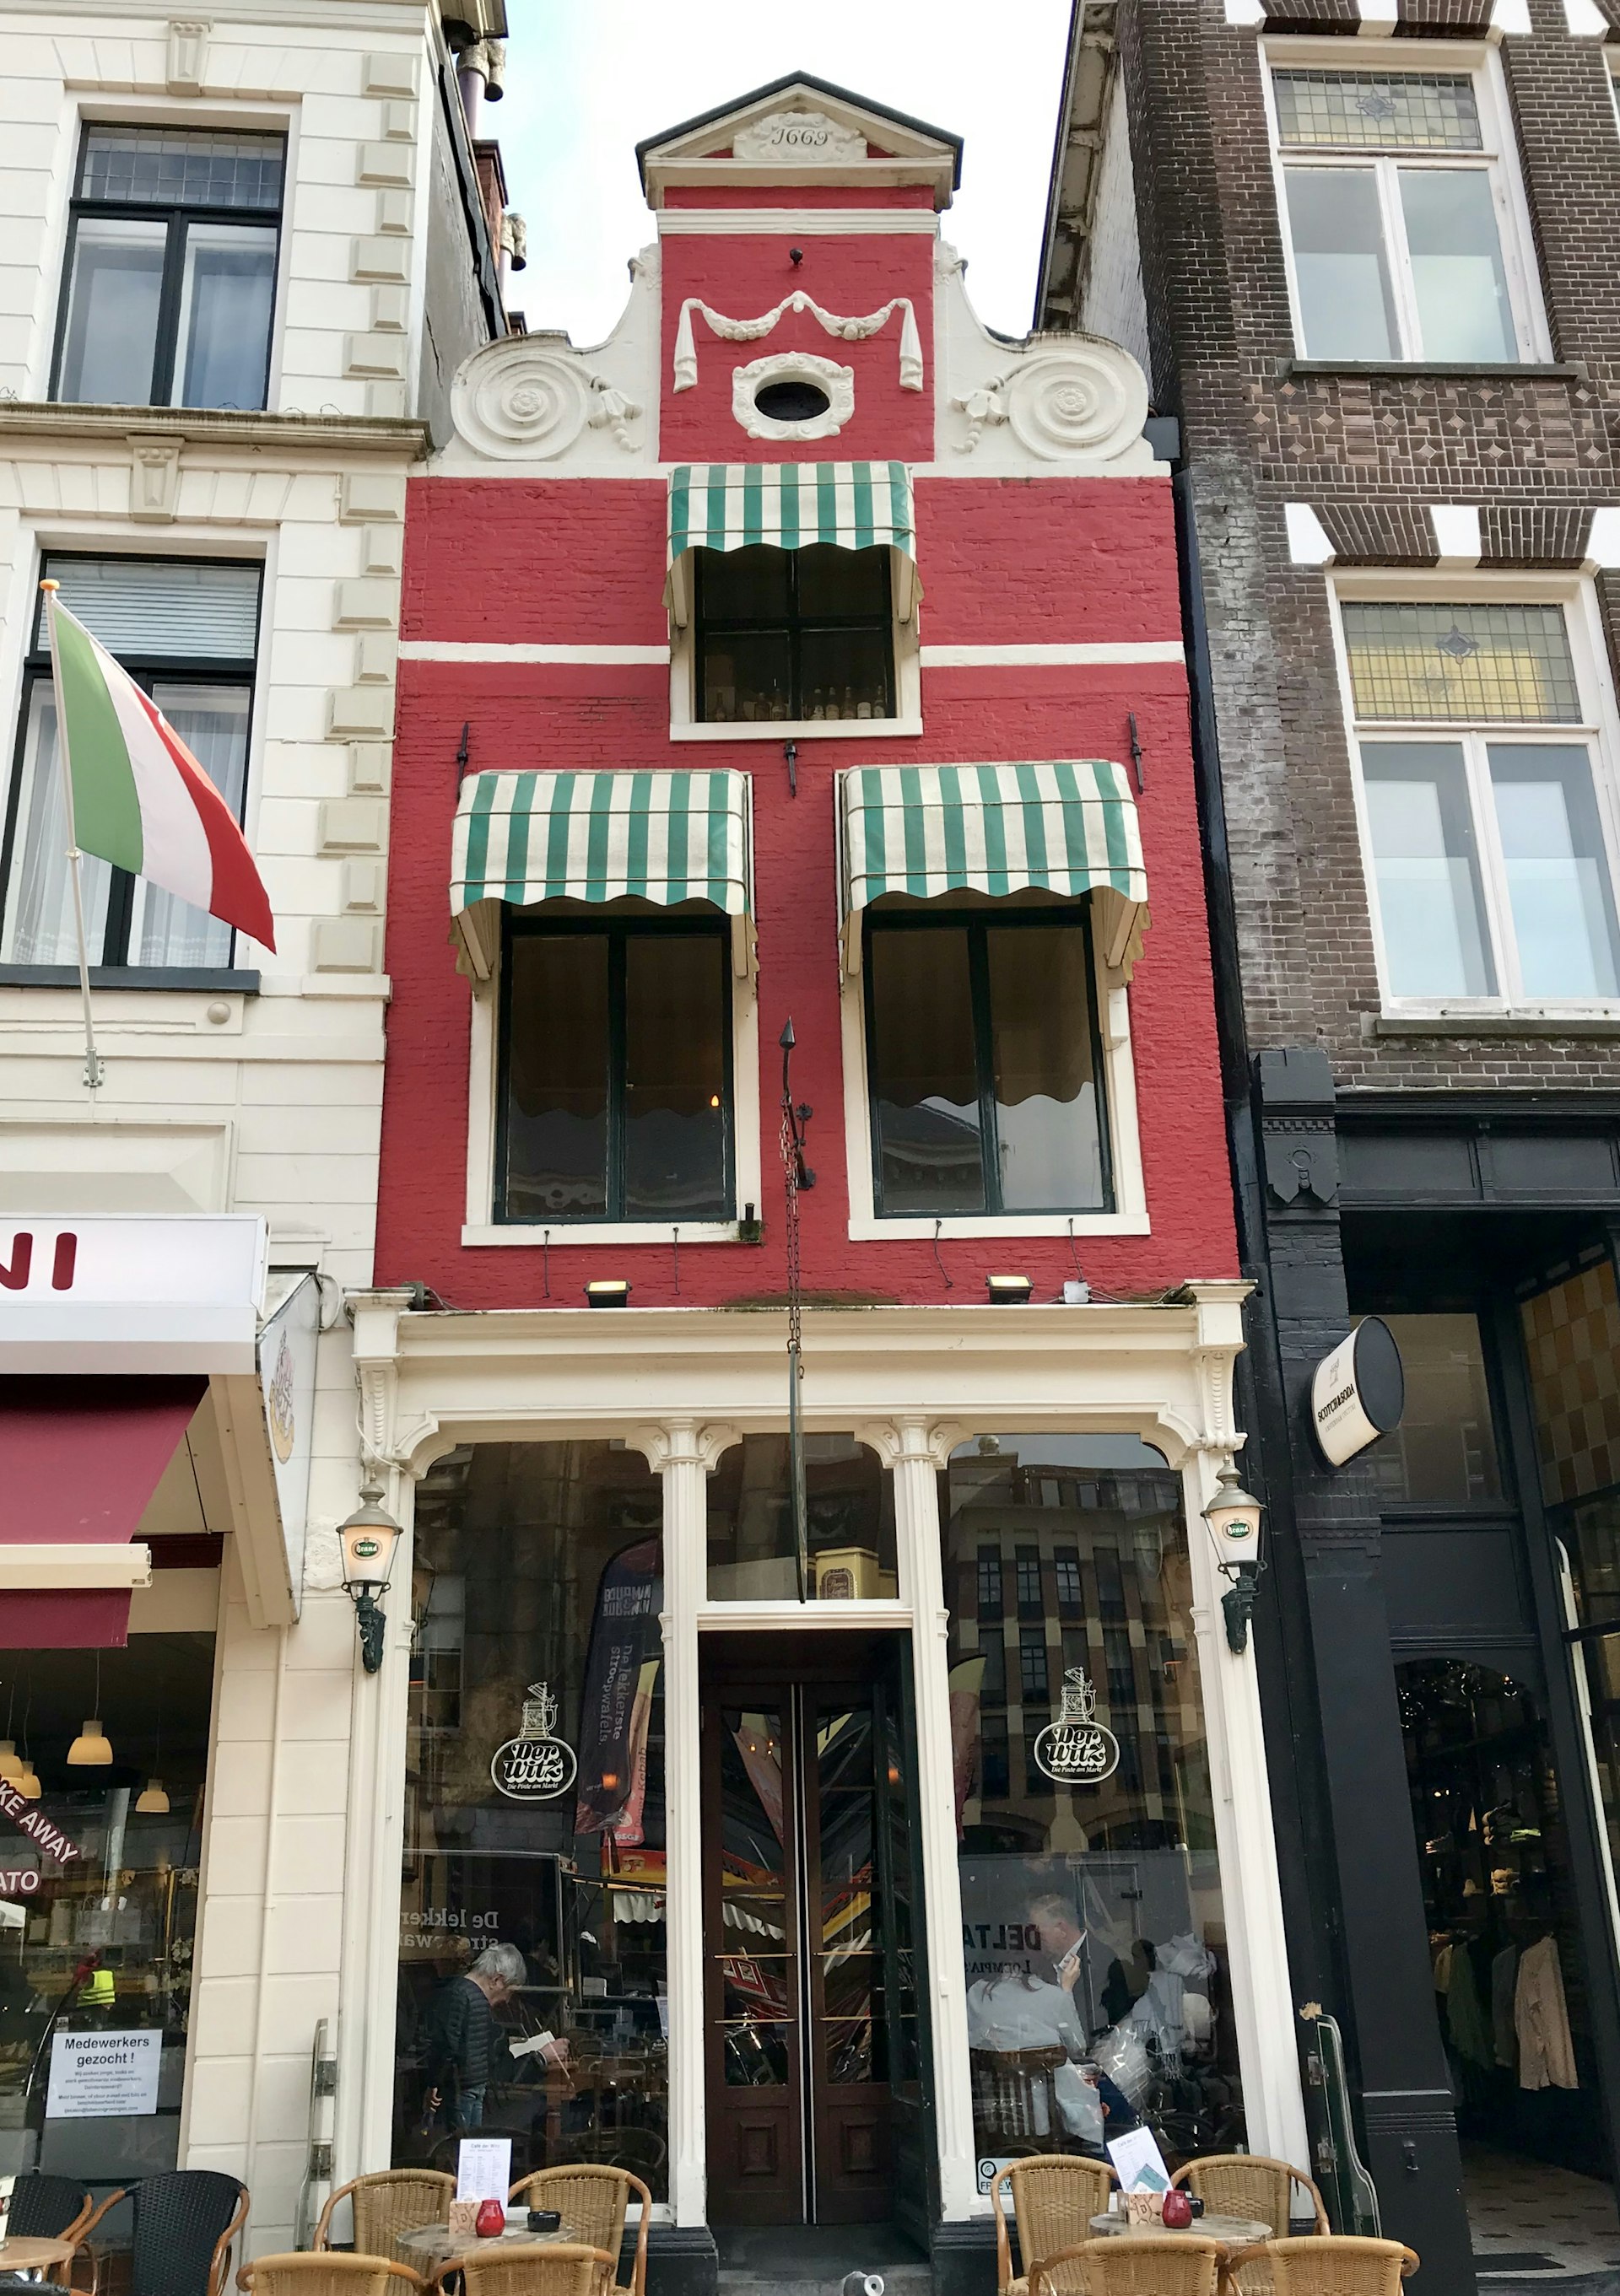 A skinny red building with green and white striped awnings sits sandwiched between two others in Groningen, Netherlands